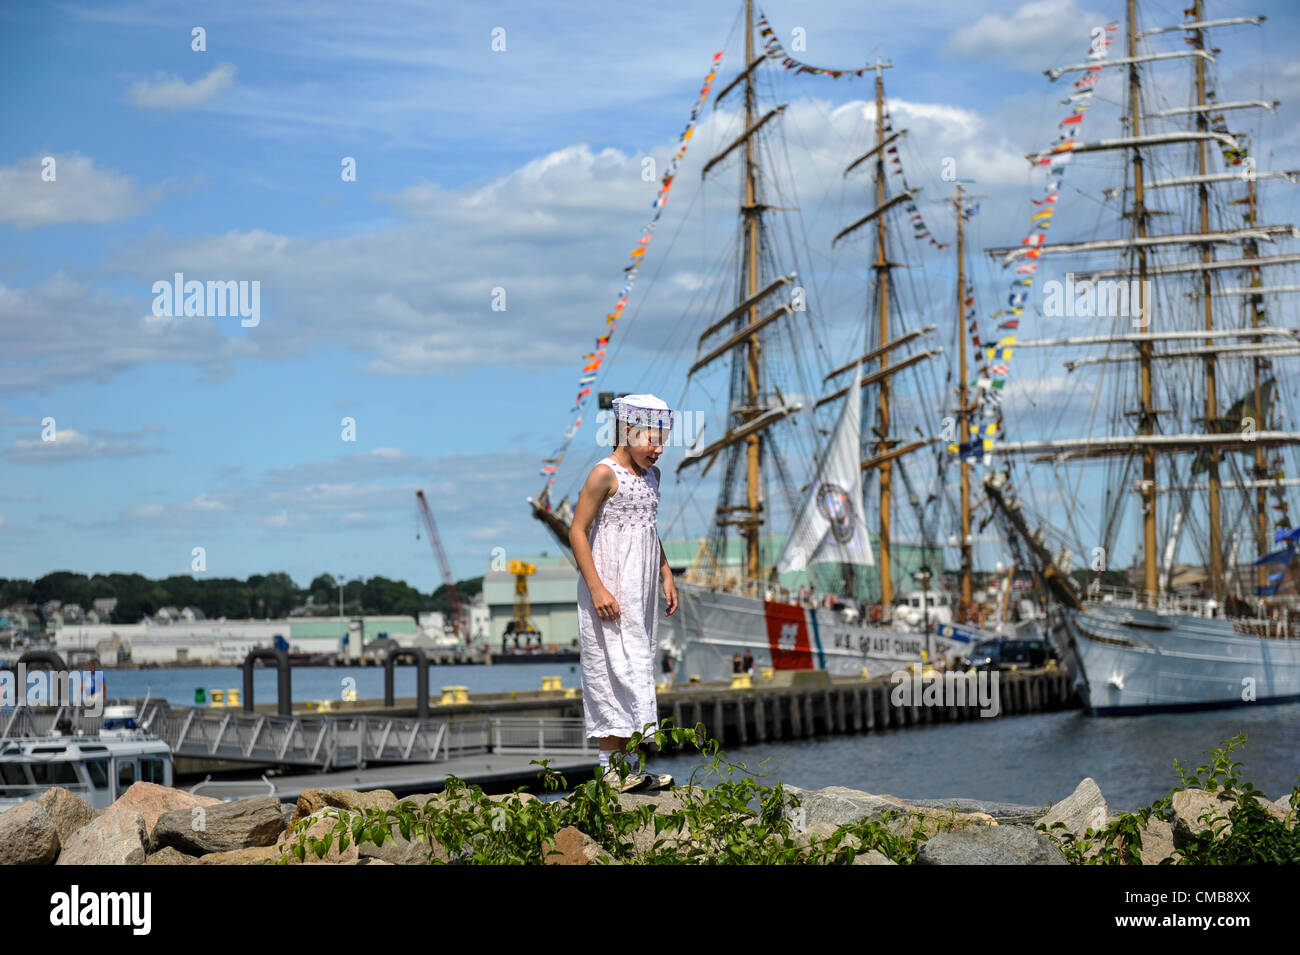 The young sister of a US Coast Guard cadet climbs along the shore in front of America's tall ship the historic three-masted barque Eagle in its home port of Fort Trumbull in New London Connecticut where it is usually docked and can be visited in summer and the Brazilian tall ship, the Cisne Branco (White Swan). Her sister is a cadet training on the Eagle (I also have a photo of them together - . See CMB8XW). Please see original Live News Caption in Optional Info. Stock Photo